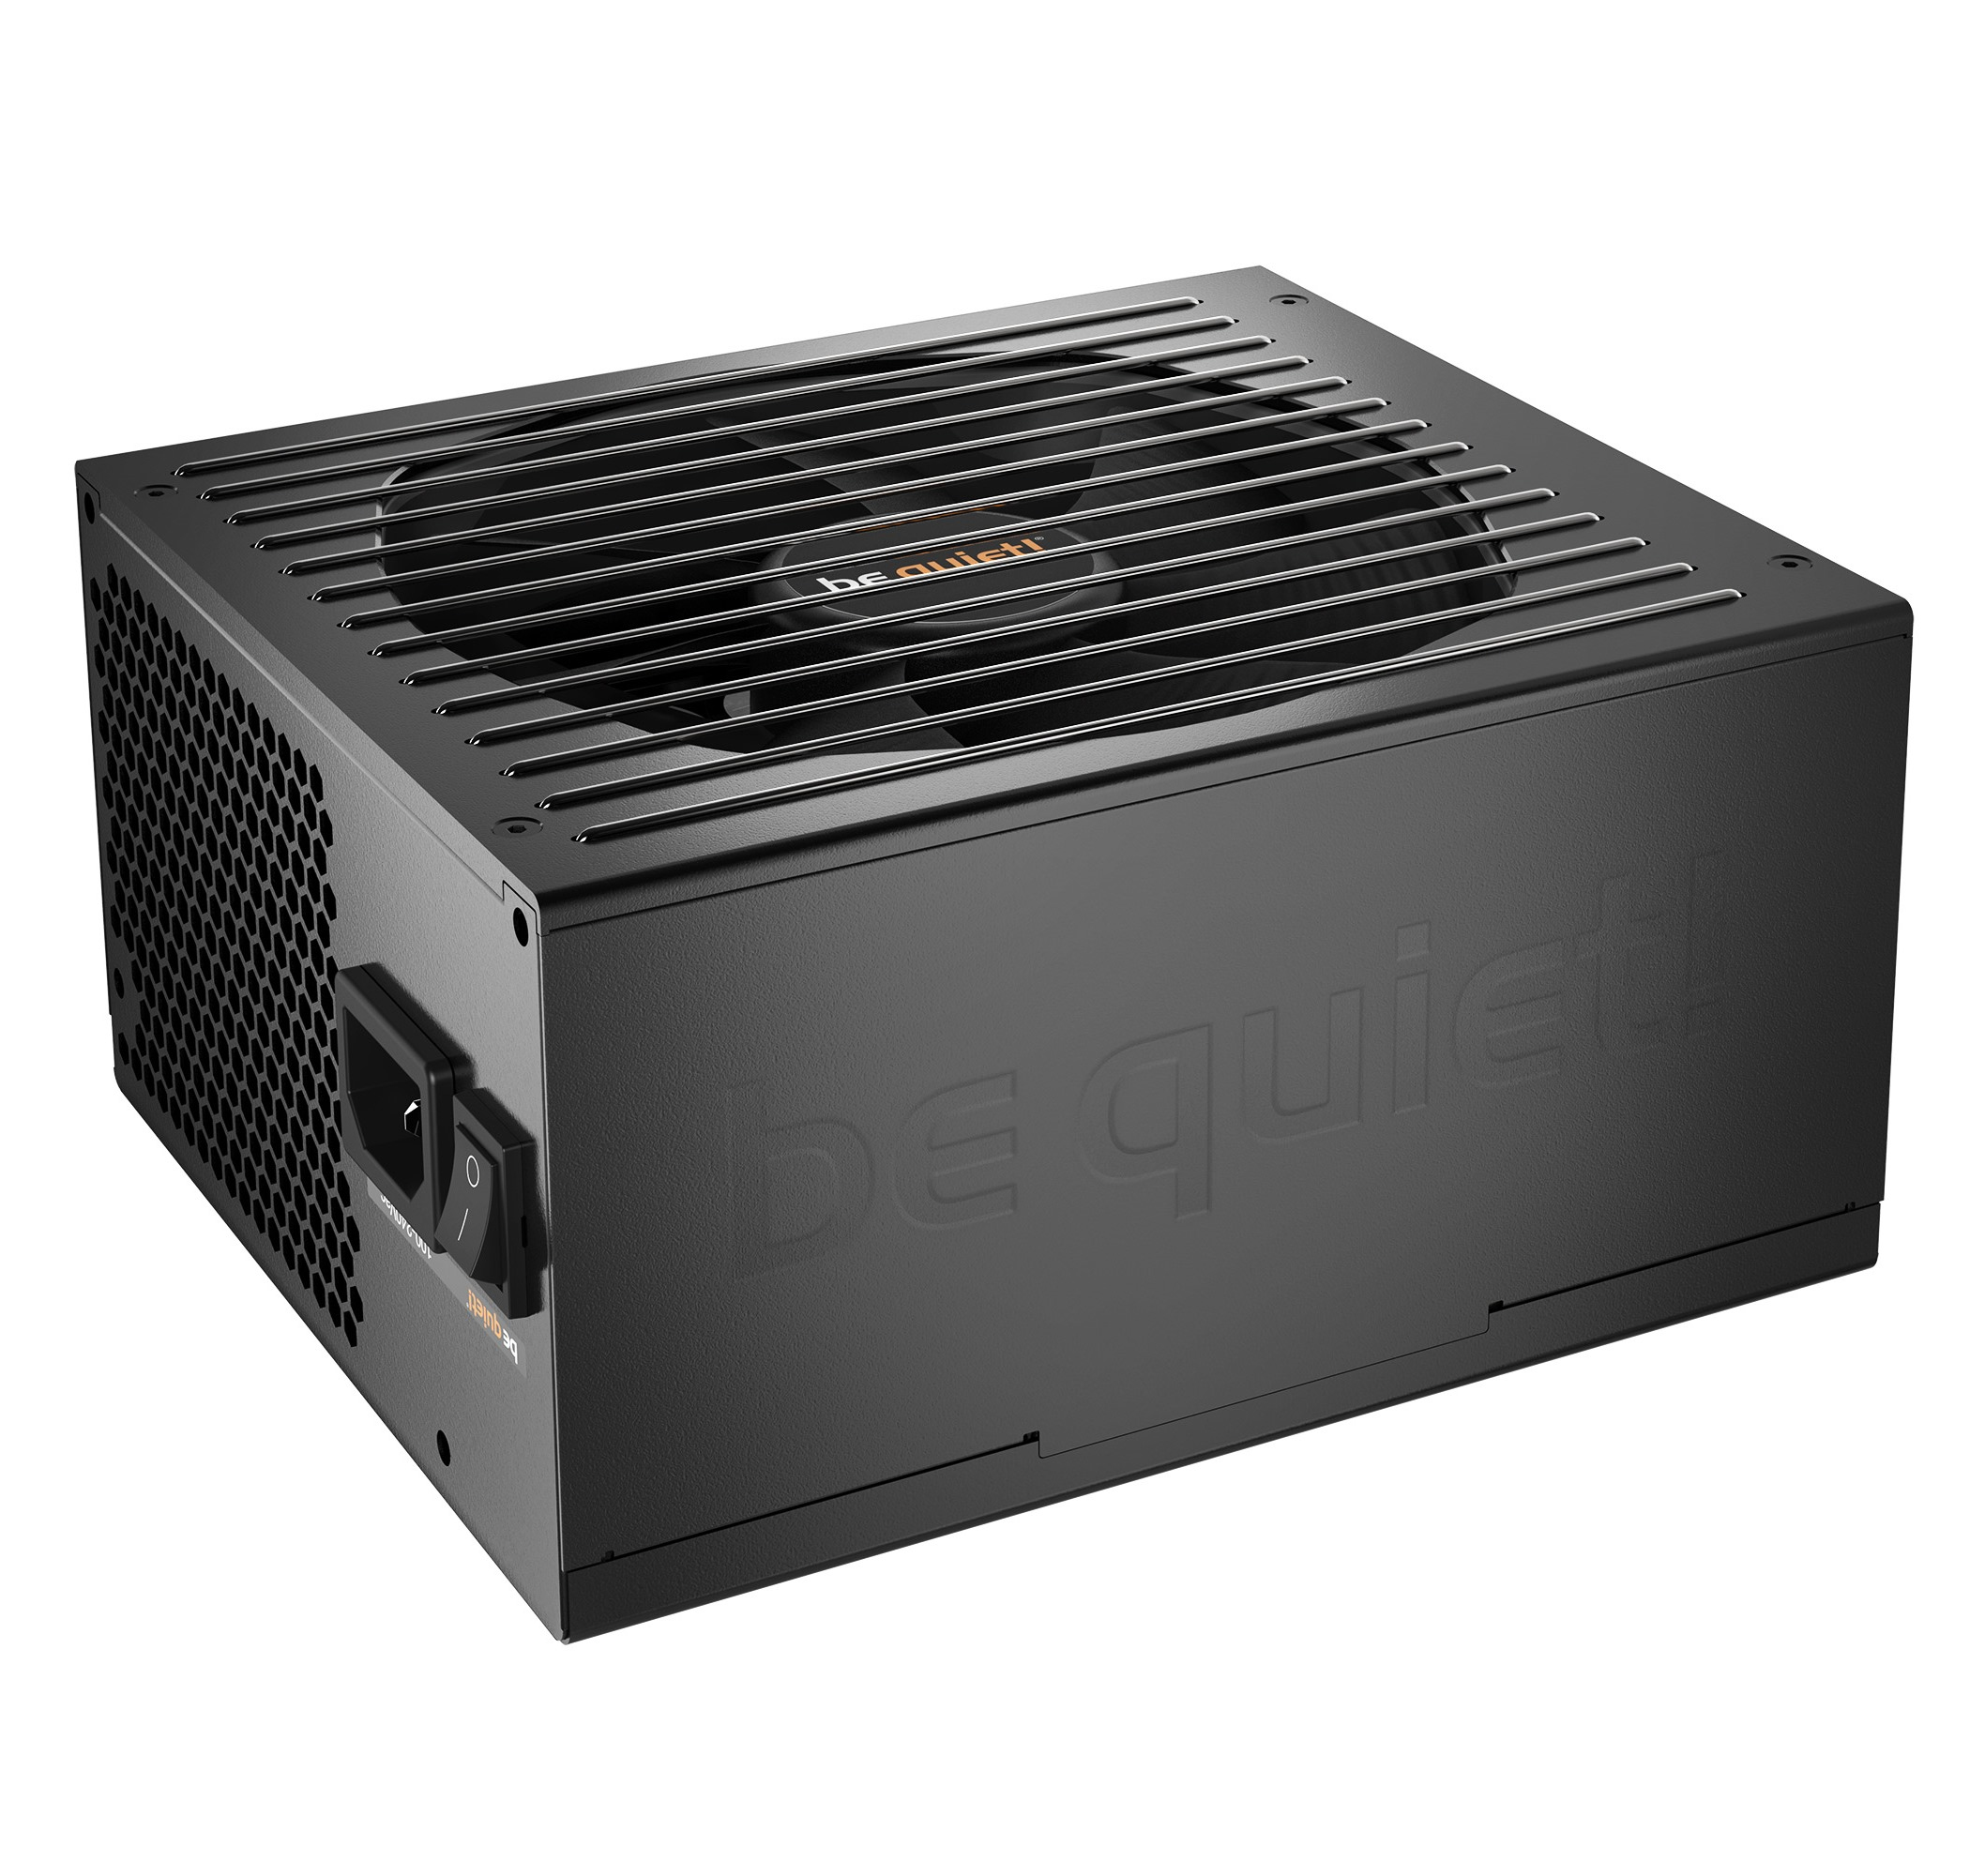 be quiet! Straight Power 11 650W, 80+ Gold, ErP, Energy Star 6.1 APFC, Sleeved, 4xPCI-Ex, 9xSATA, 3xPATA, Full Cable Management, DC Wire Free, Silent Wings 3 135 // E11-650W